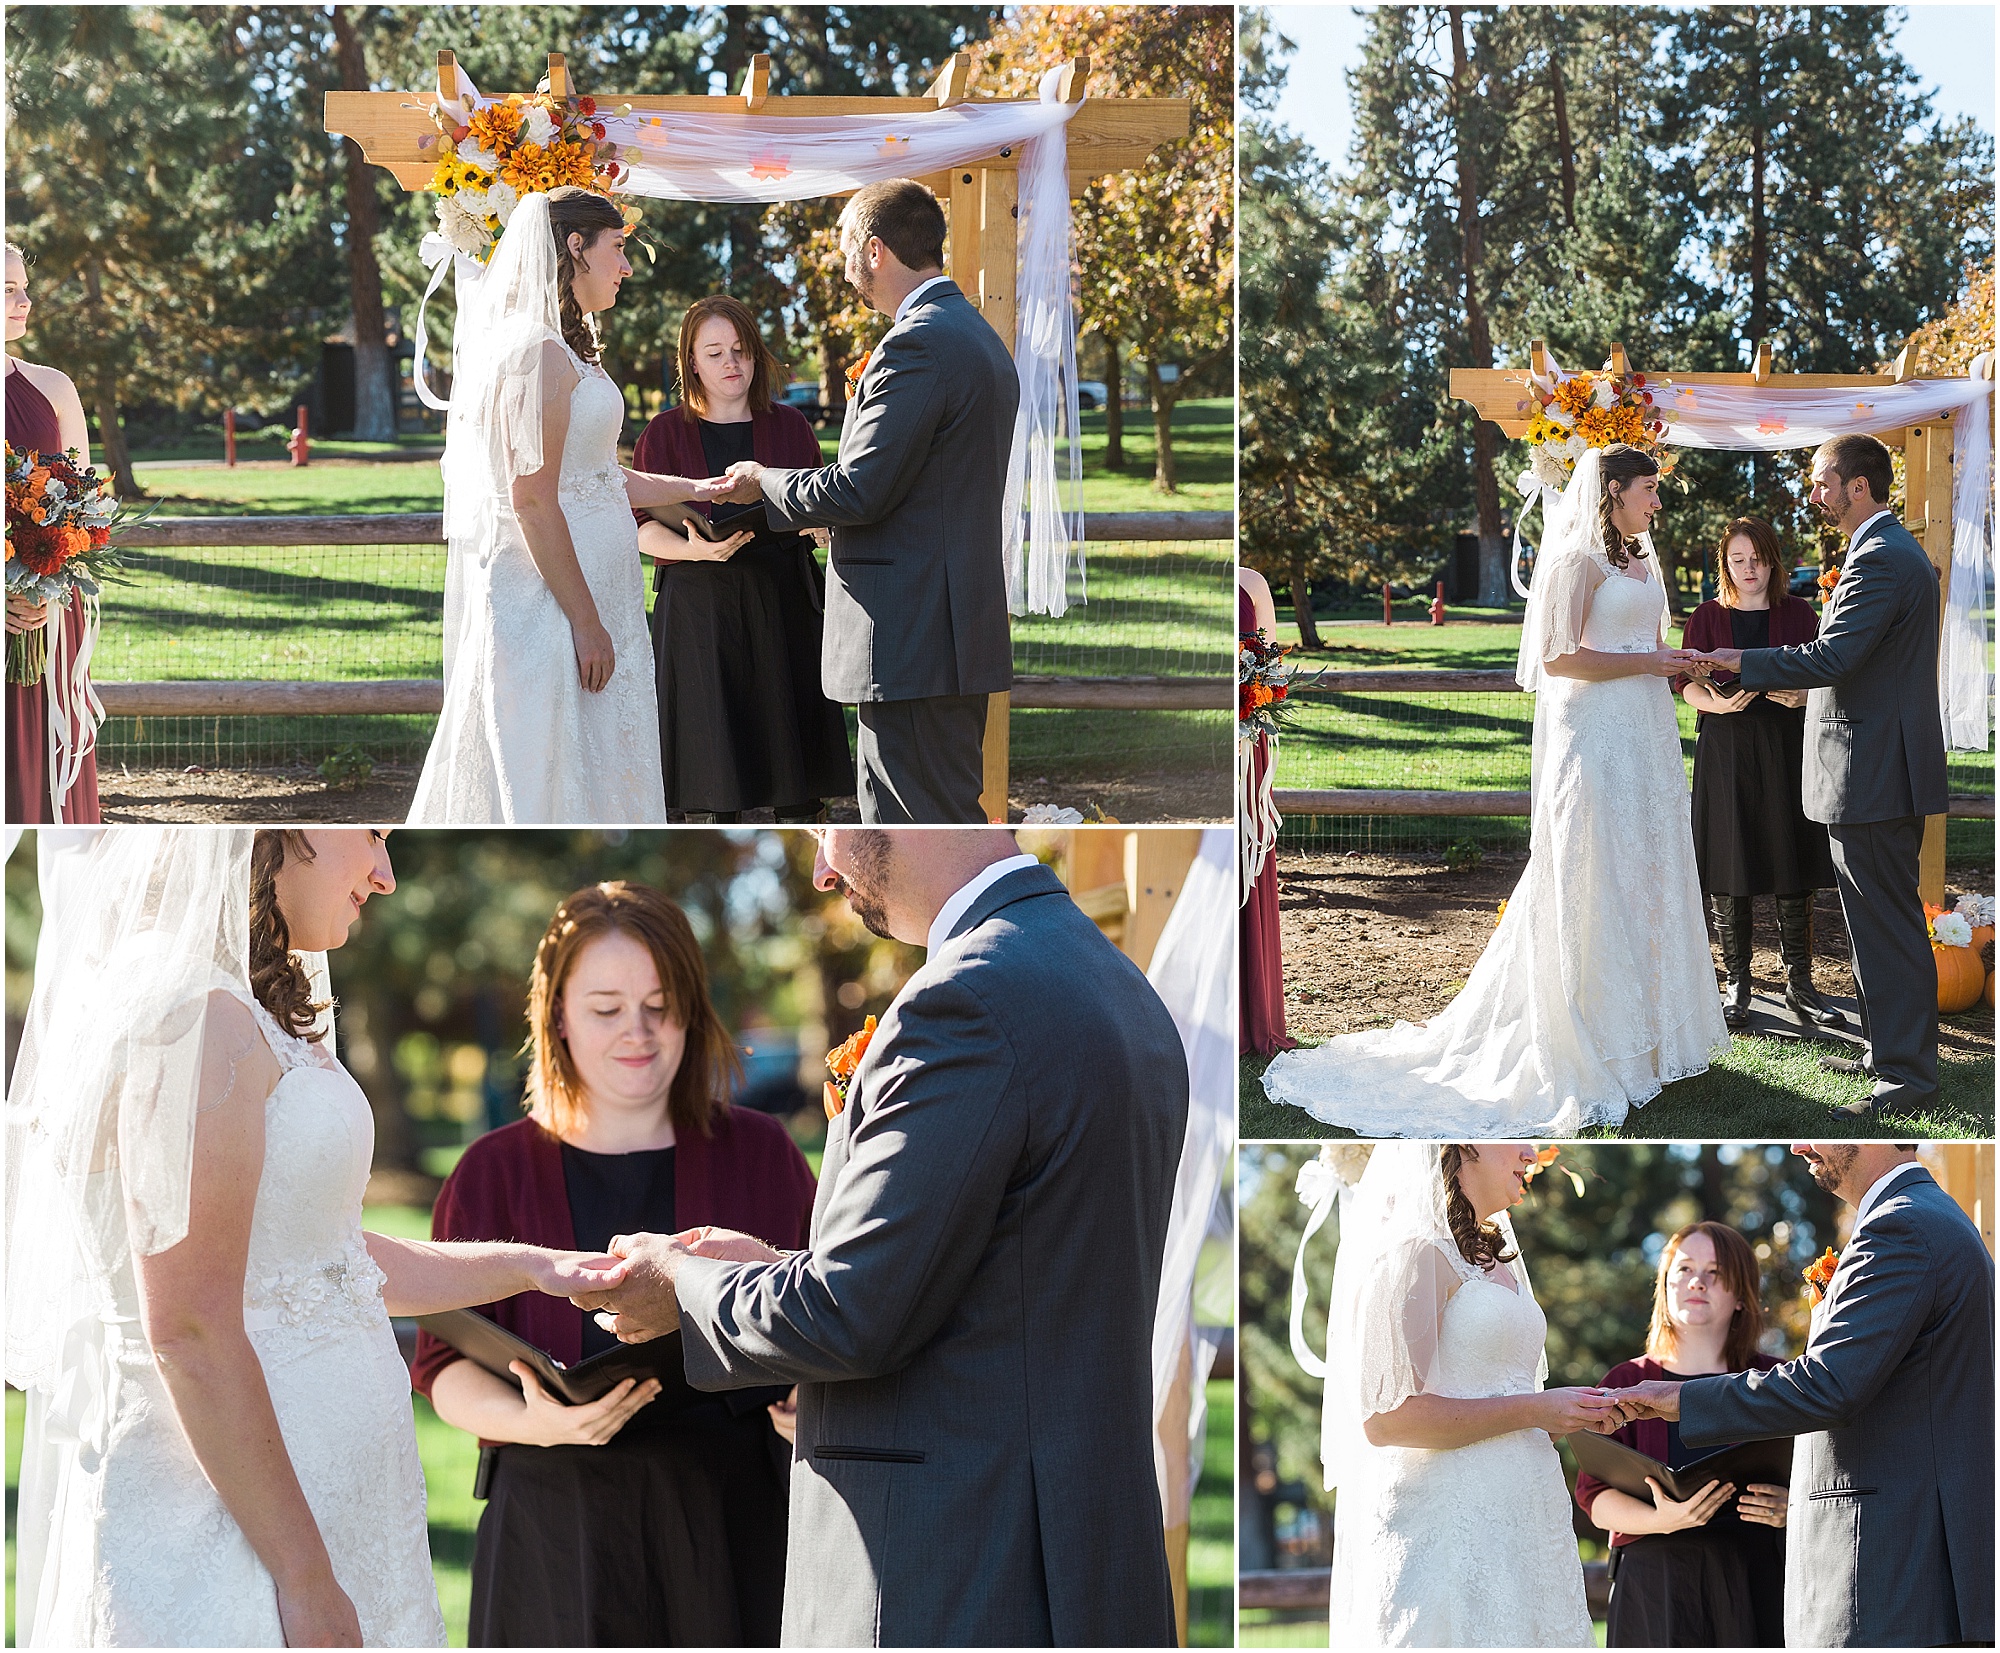 A couple exchanges their wedding rings during a beautiful outdoor ceremony at their Hollinshead Barn fall wedding in Bend, Oregon. | Erica Swantek Photography